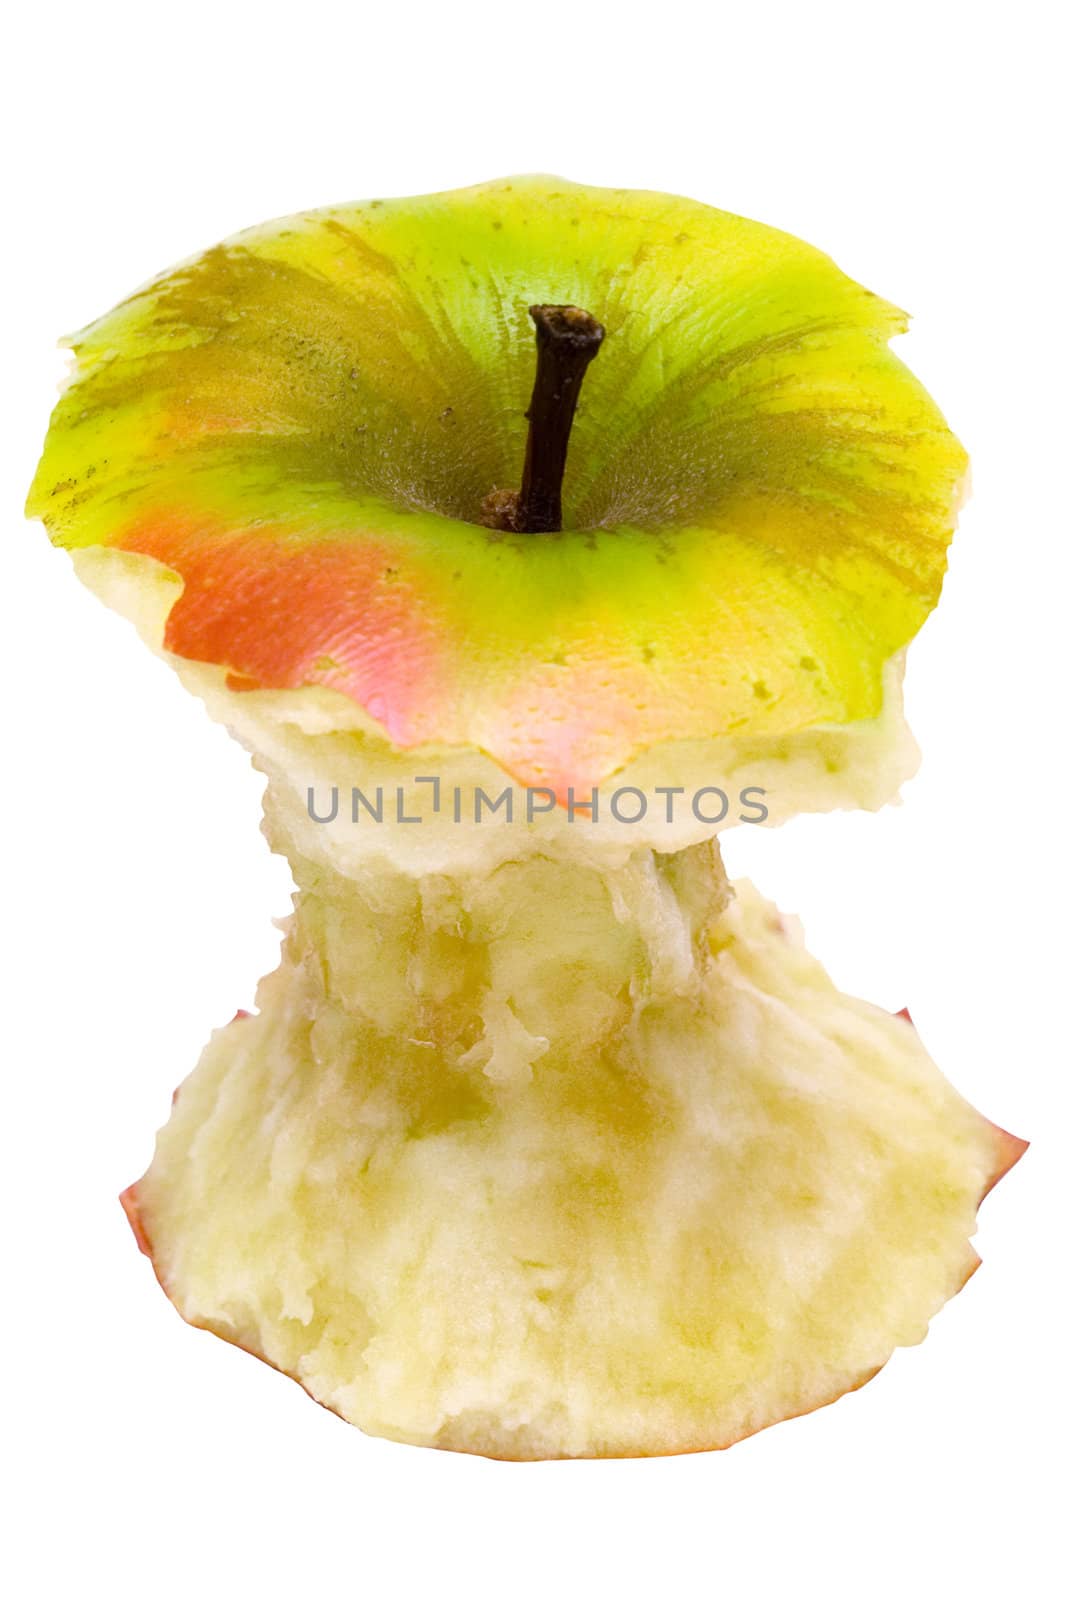 Eaten apple isolated on a white background. File contains clipping path.